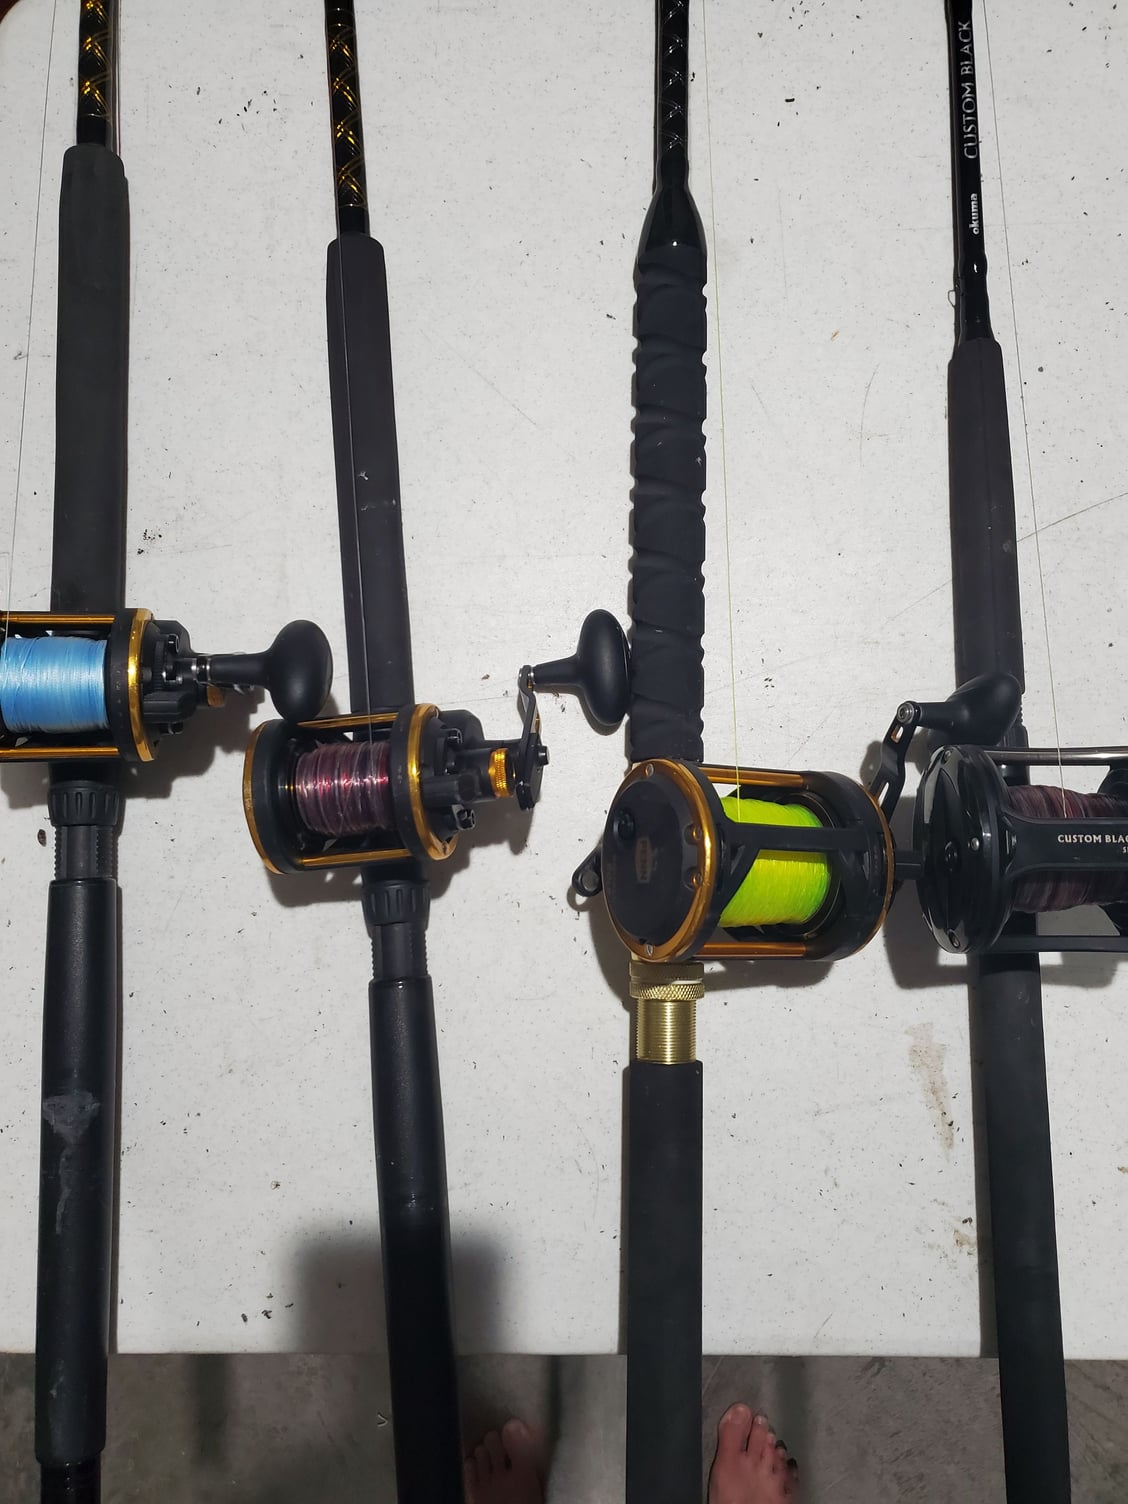 Penn and okuma lever drag combos - The Hull Truth - Boating and